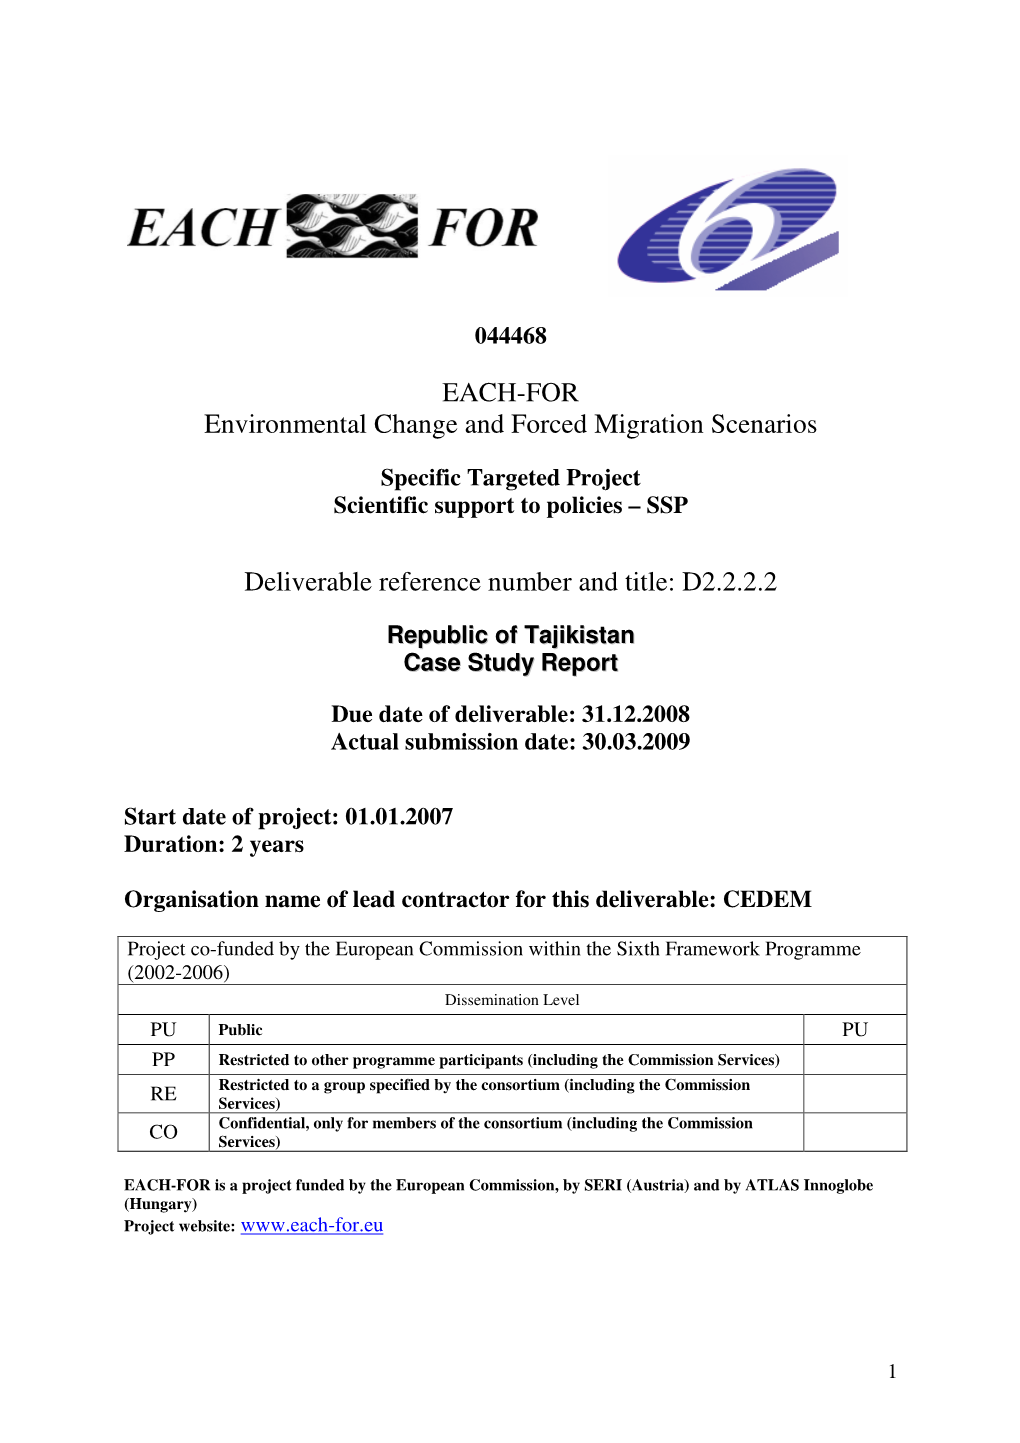 EACH-FOR Environmental Change and Forced Migration Scenarios